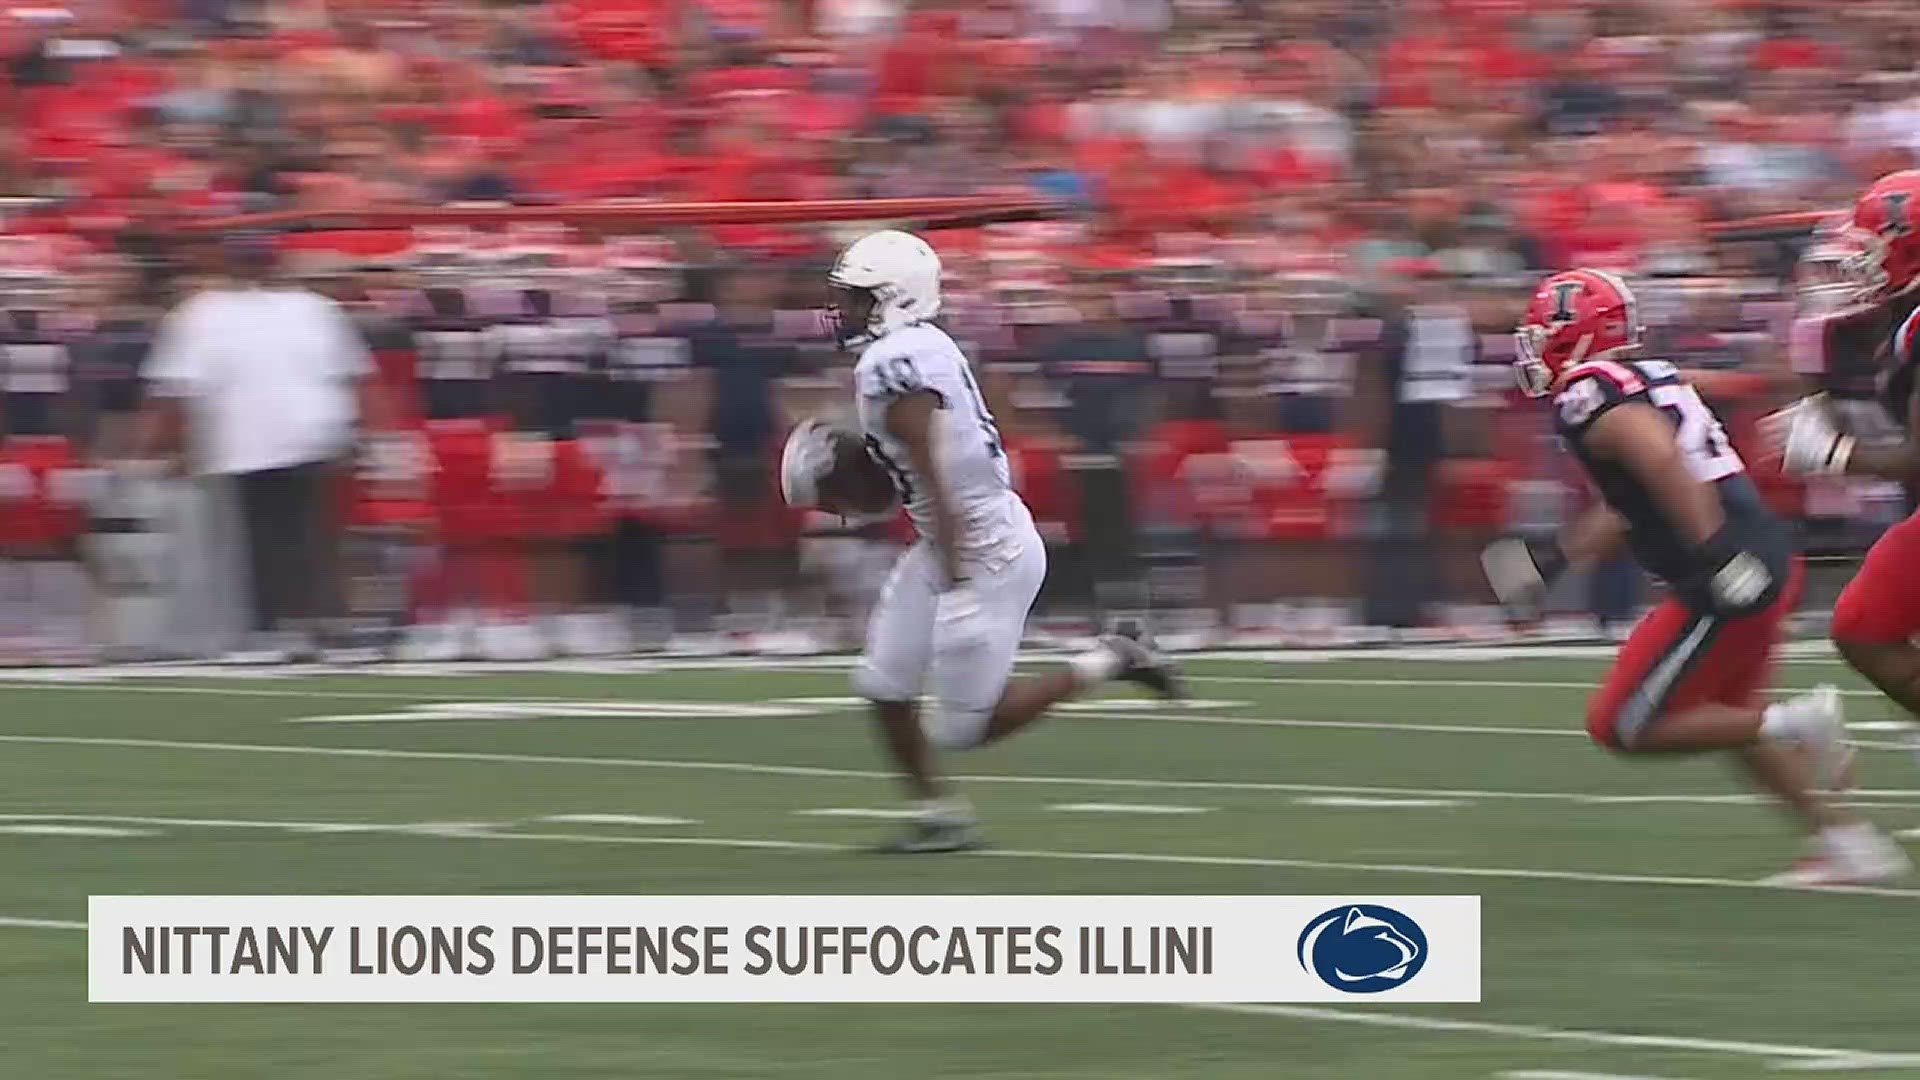 The Nittany Lions turn Illinois over 5 times in route to blowout win in Champaign